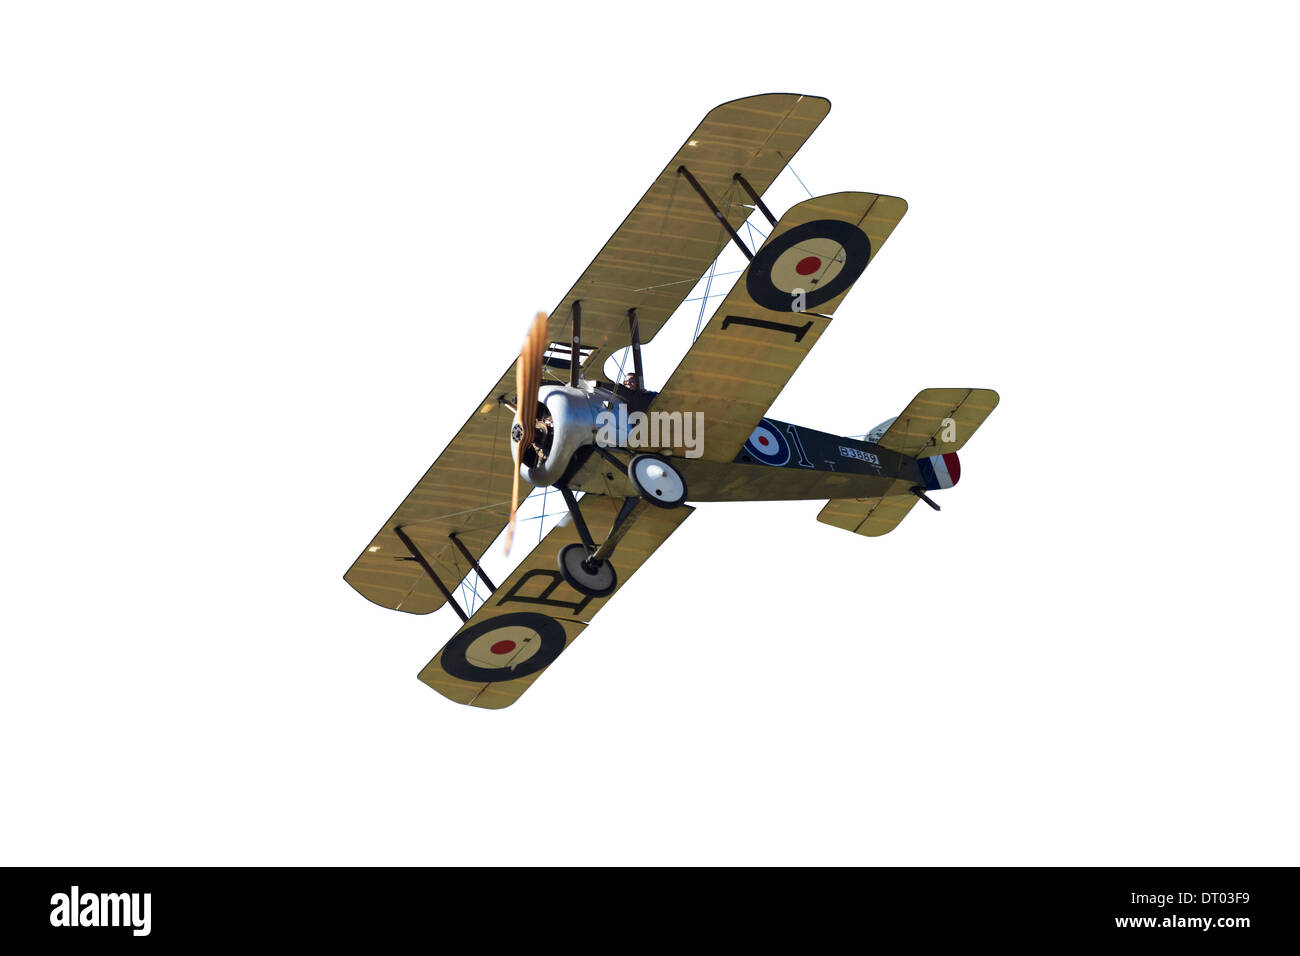 Cutout of Sopwith Camel - WWI Fighter Plane Stock Photo